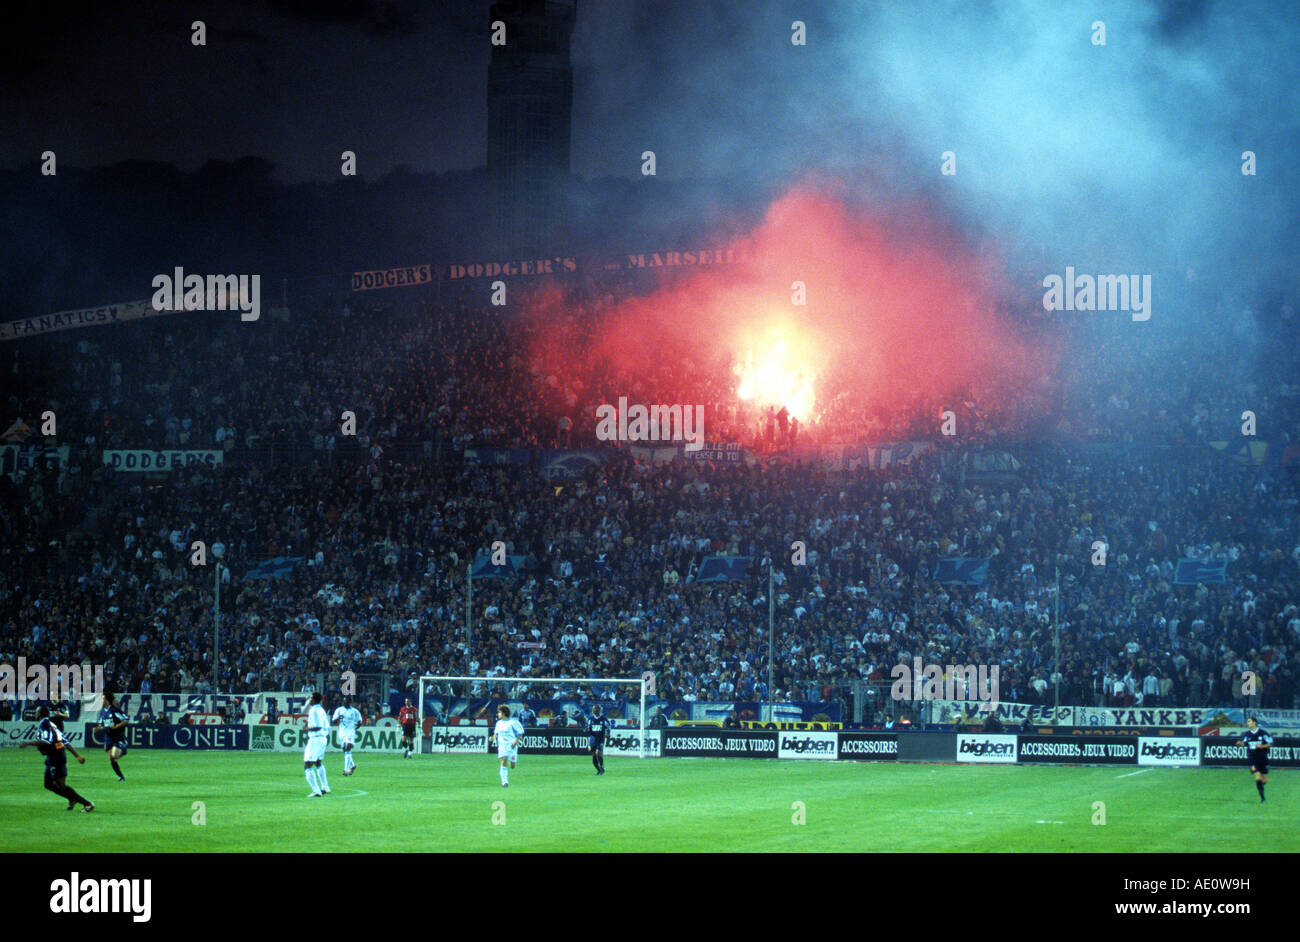 Olypique Marseille football fans celebrate a goal during a game at the Stade Velodrome, Marseille, France. Stock Photo